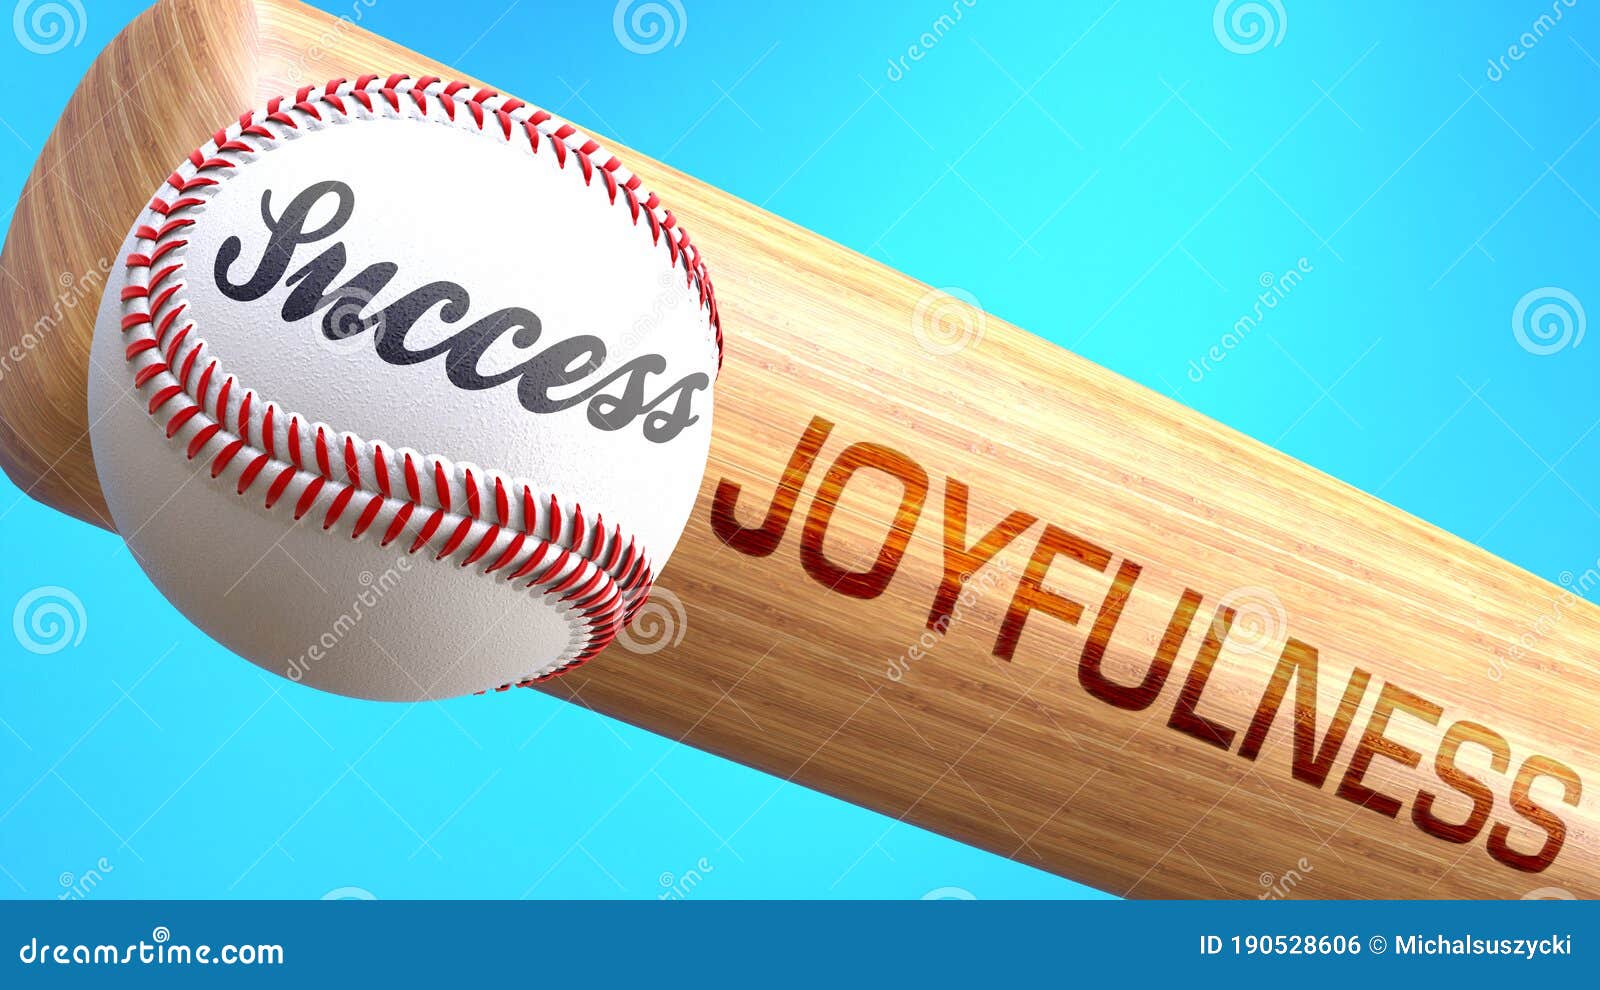 success in life depends on joyfulness - pictured as word joyfulness on a bat, to show that joyfulness is crucial for successful